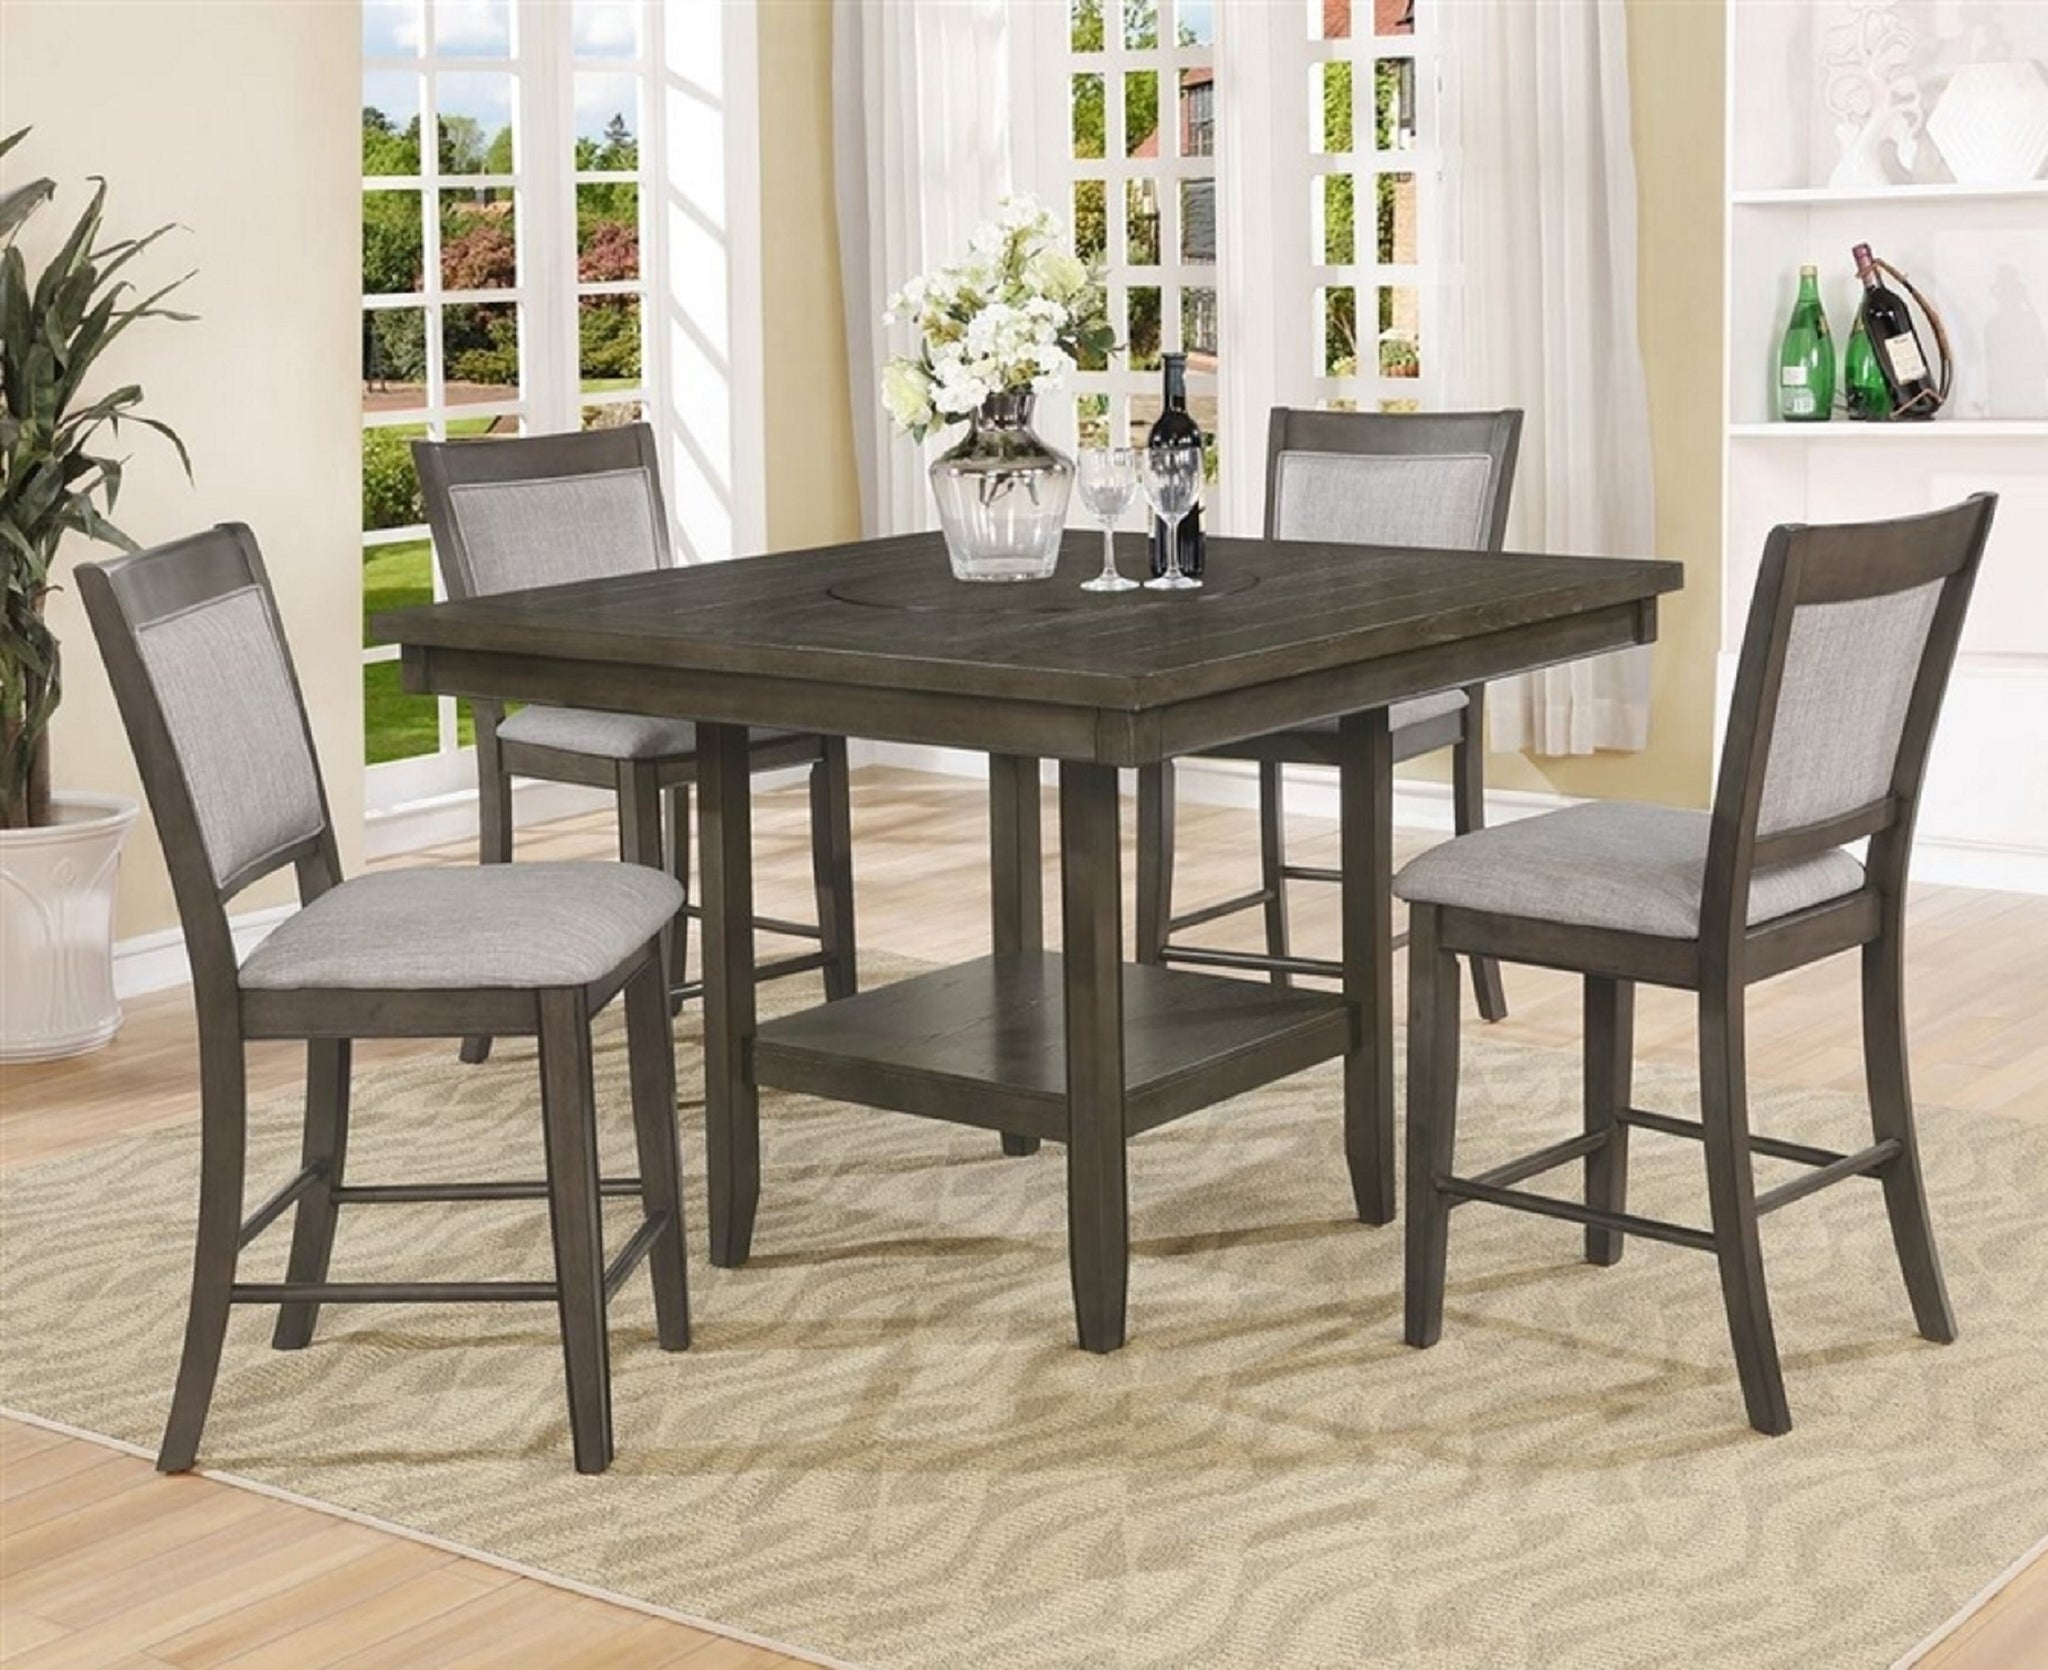 5pc Dining Set Contemporary Farmhouse Style Counter upholstered chair-wood-gray-seats 4-wood-dining